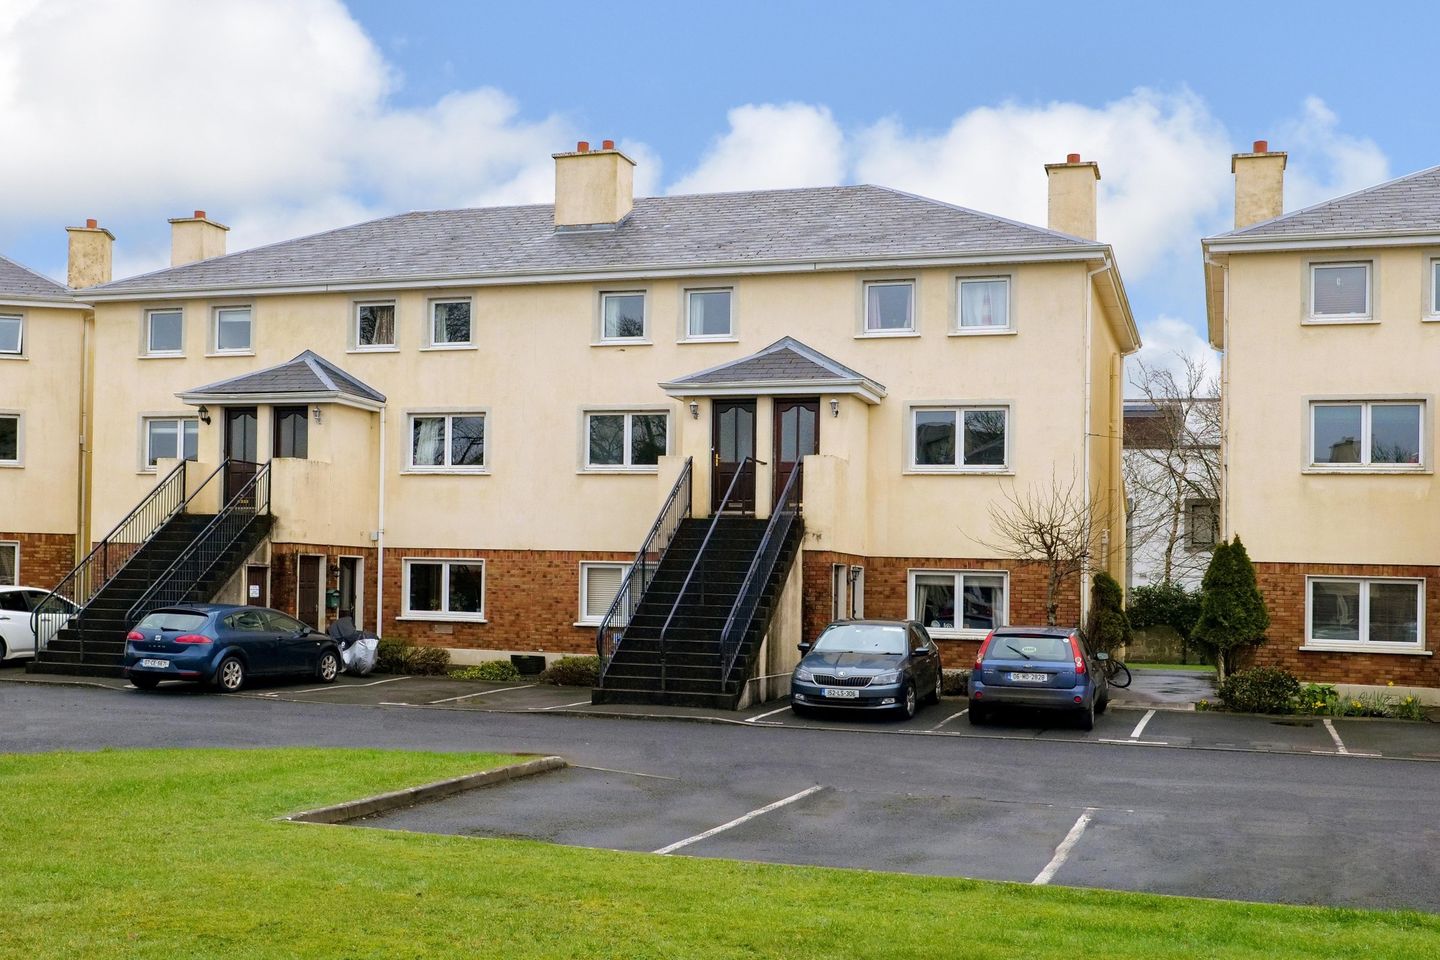 37 Lios Ealtan, Salthill, Co. Galway, H91PY86